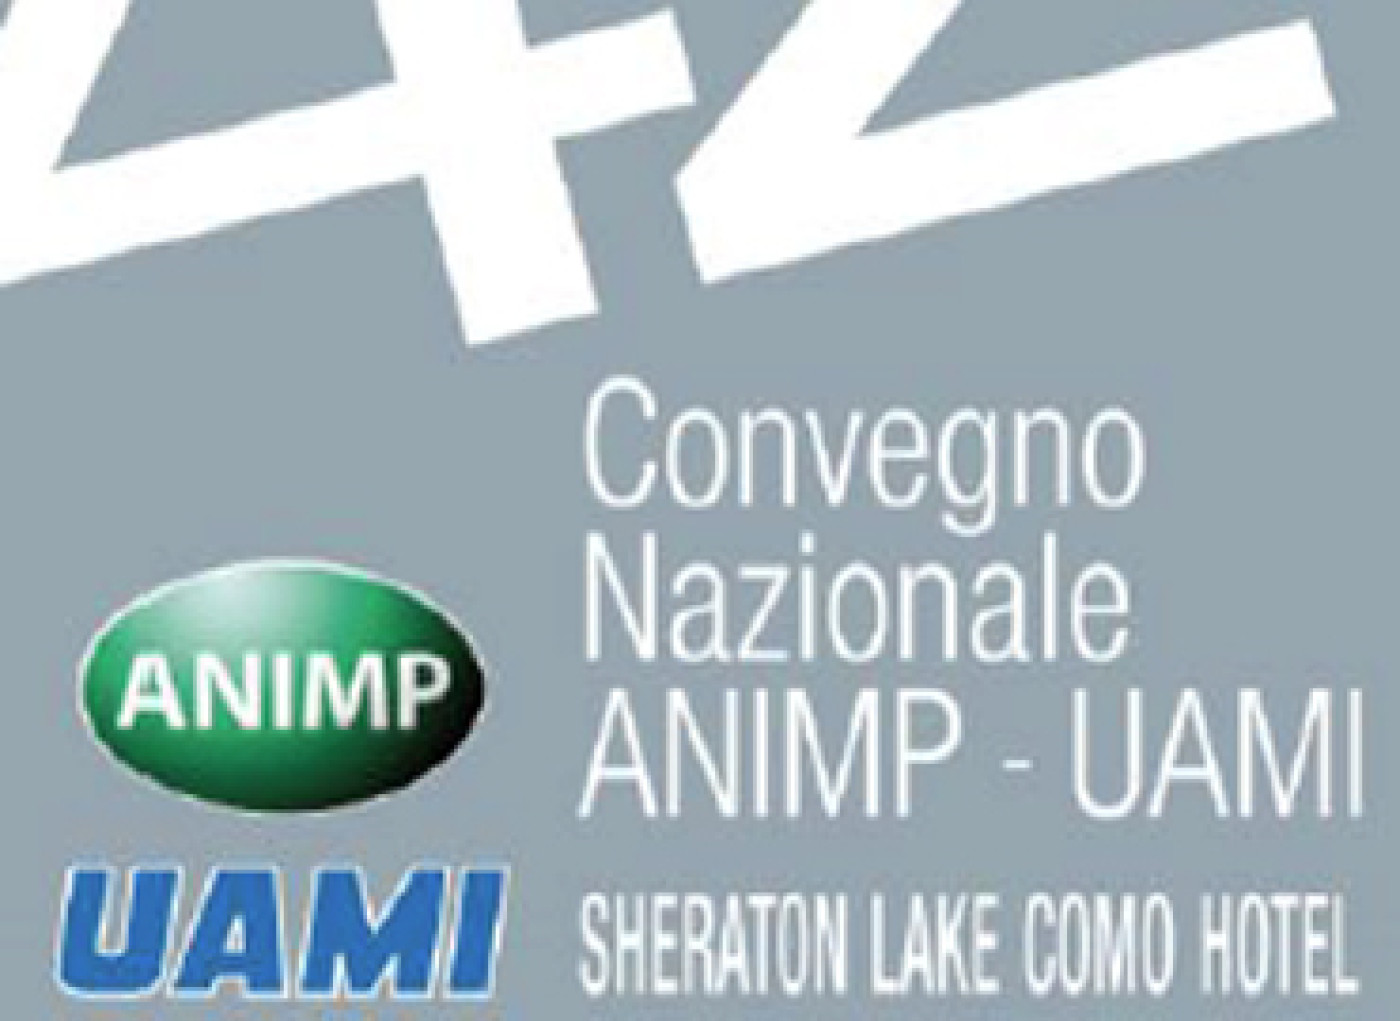 Techfem is the main sponsor of the 42nd National Convention ANIMP-UAMI